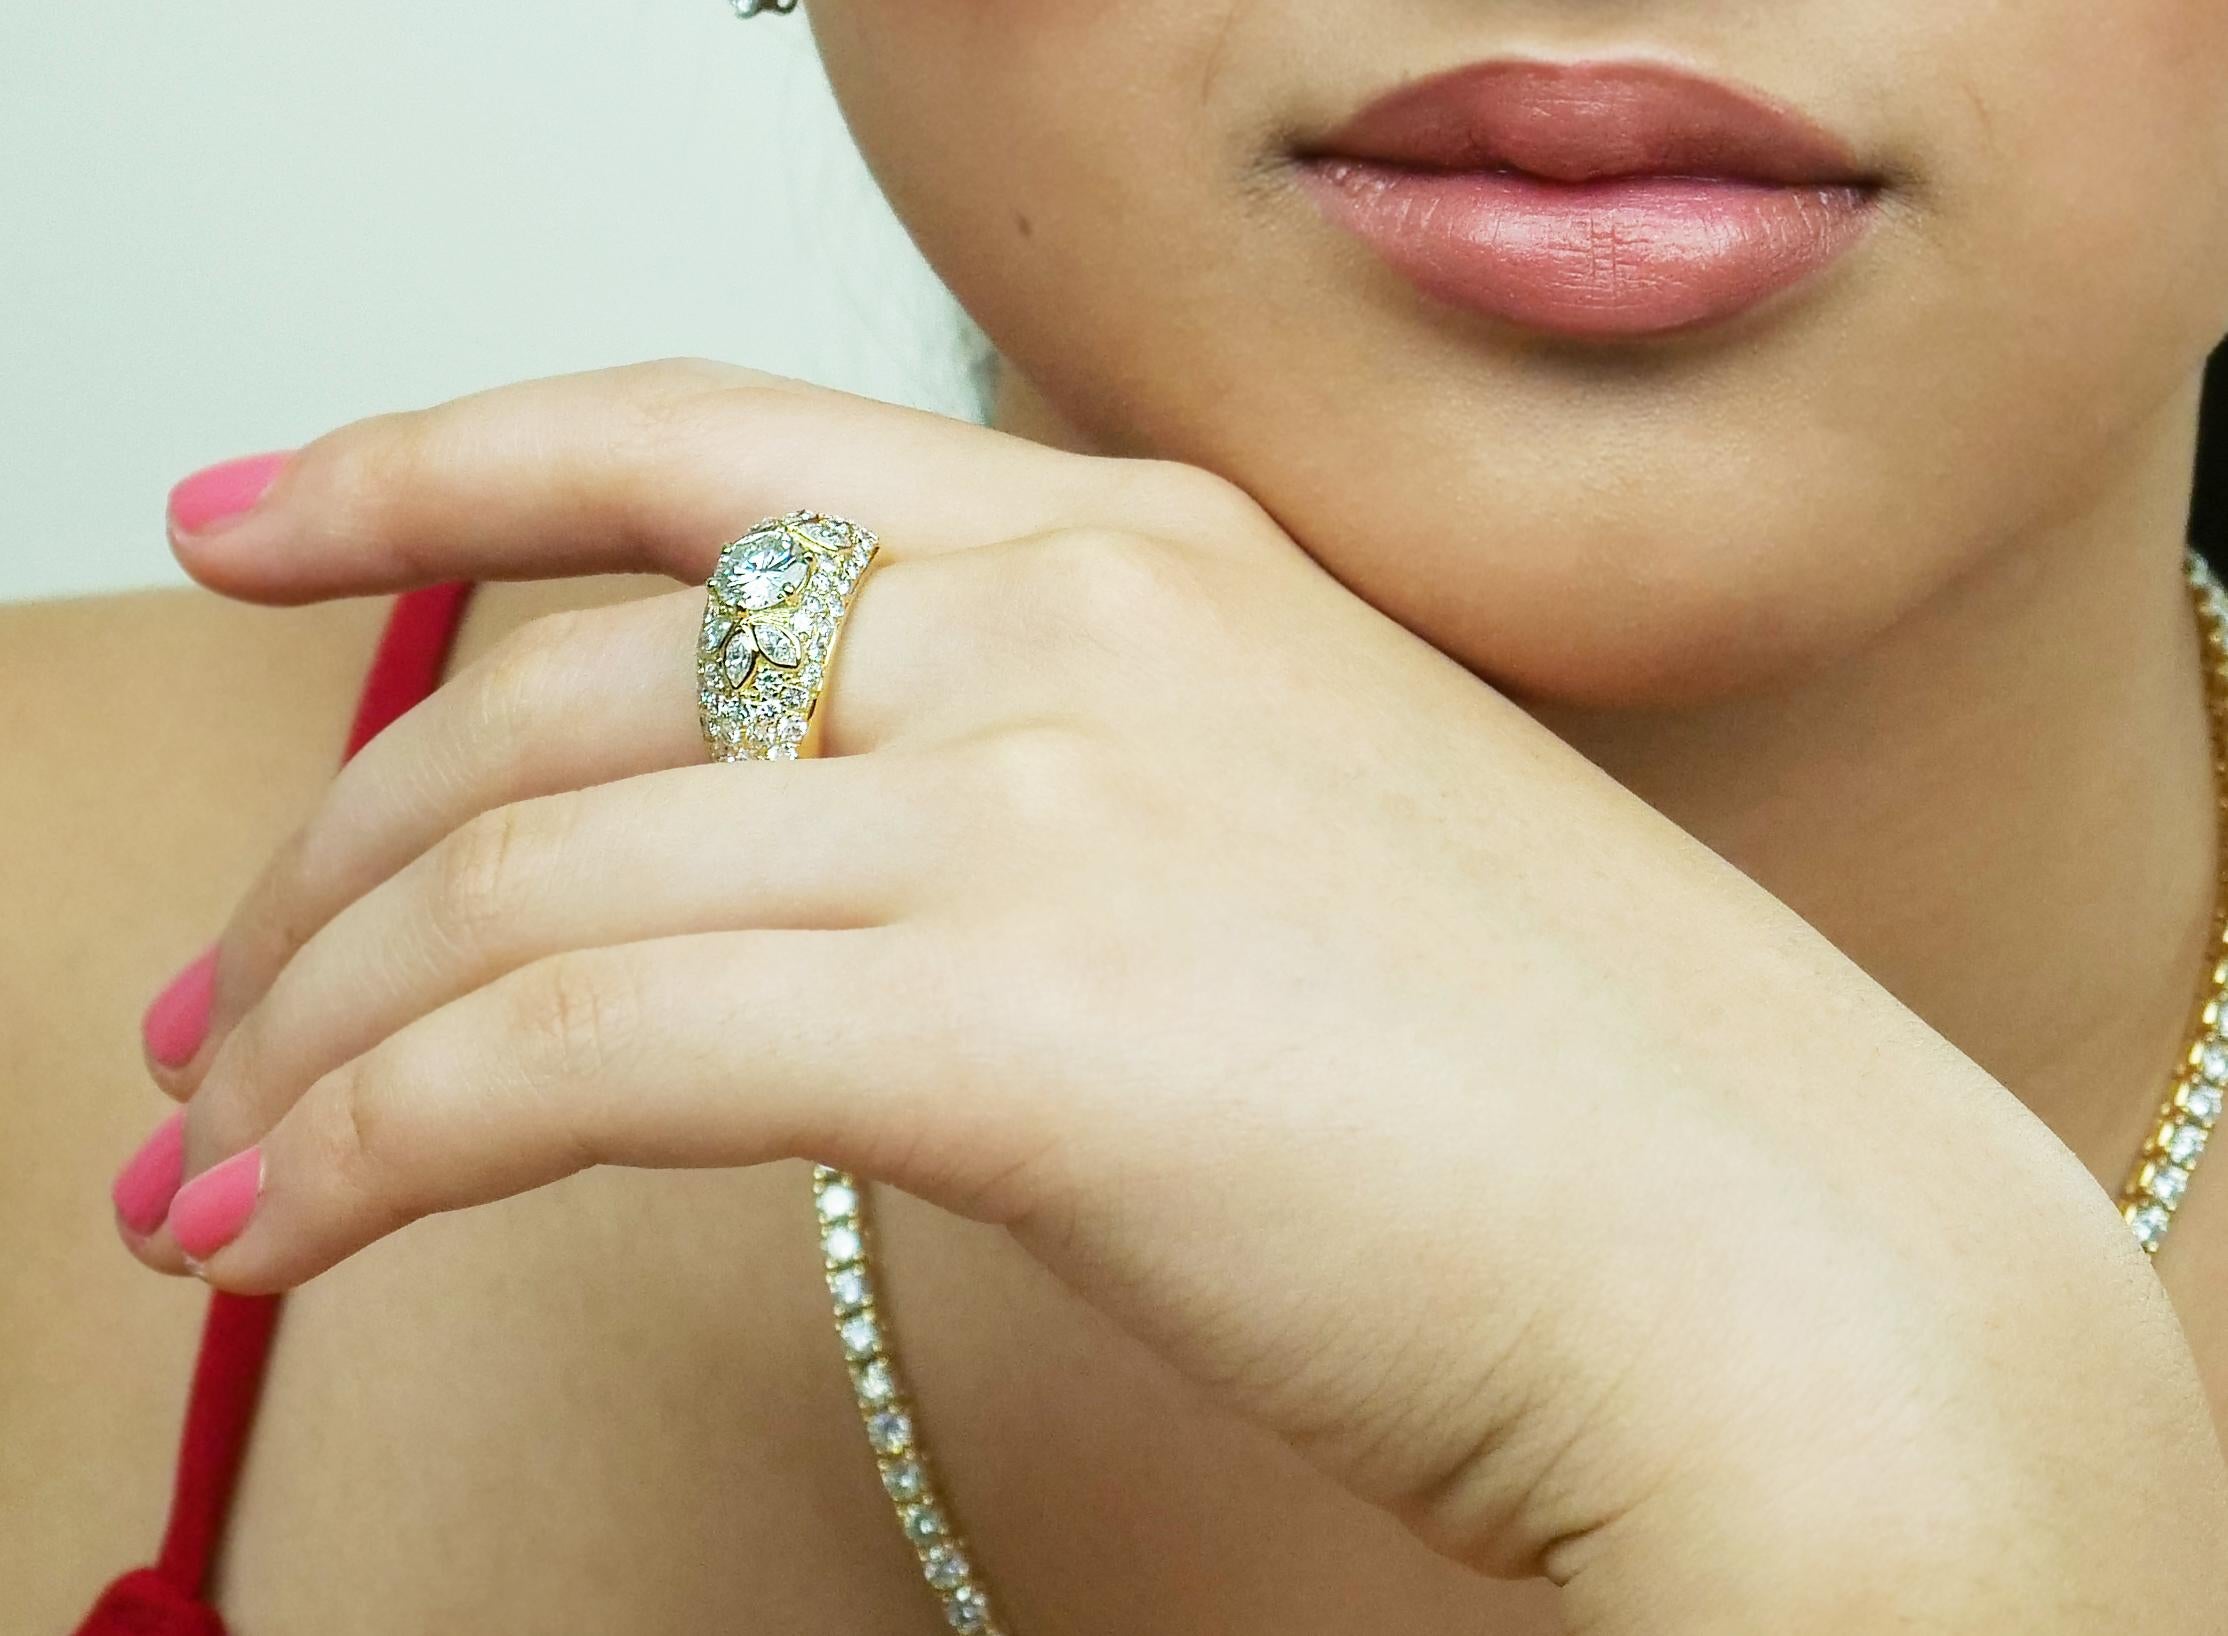 This ring is divine, it is a magnificent creation of a thick chunky yellow gold band, the purest shade of yellow, stunning clarity and gentlest of your skin that’s been encrusted with more diamonds than you could picture. These diamonds glisten with